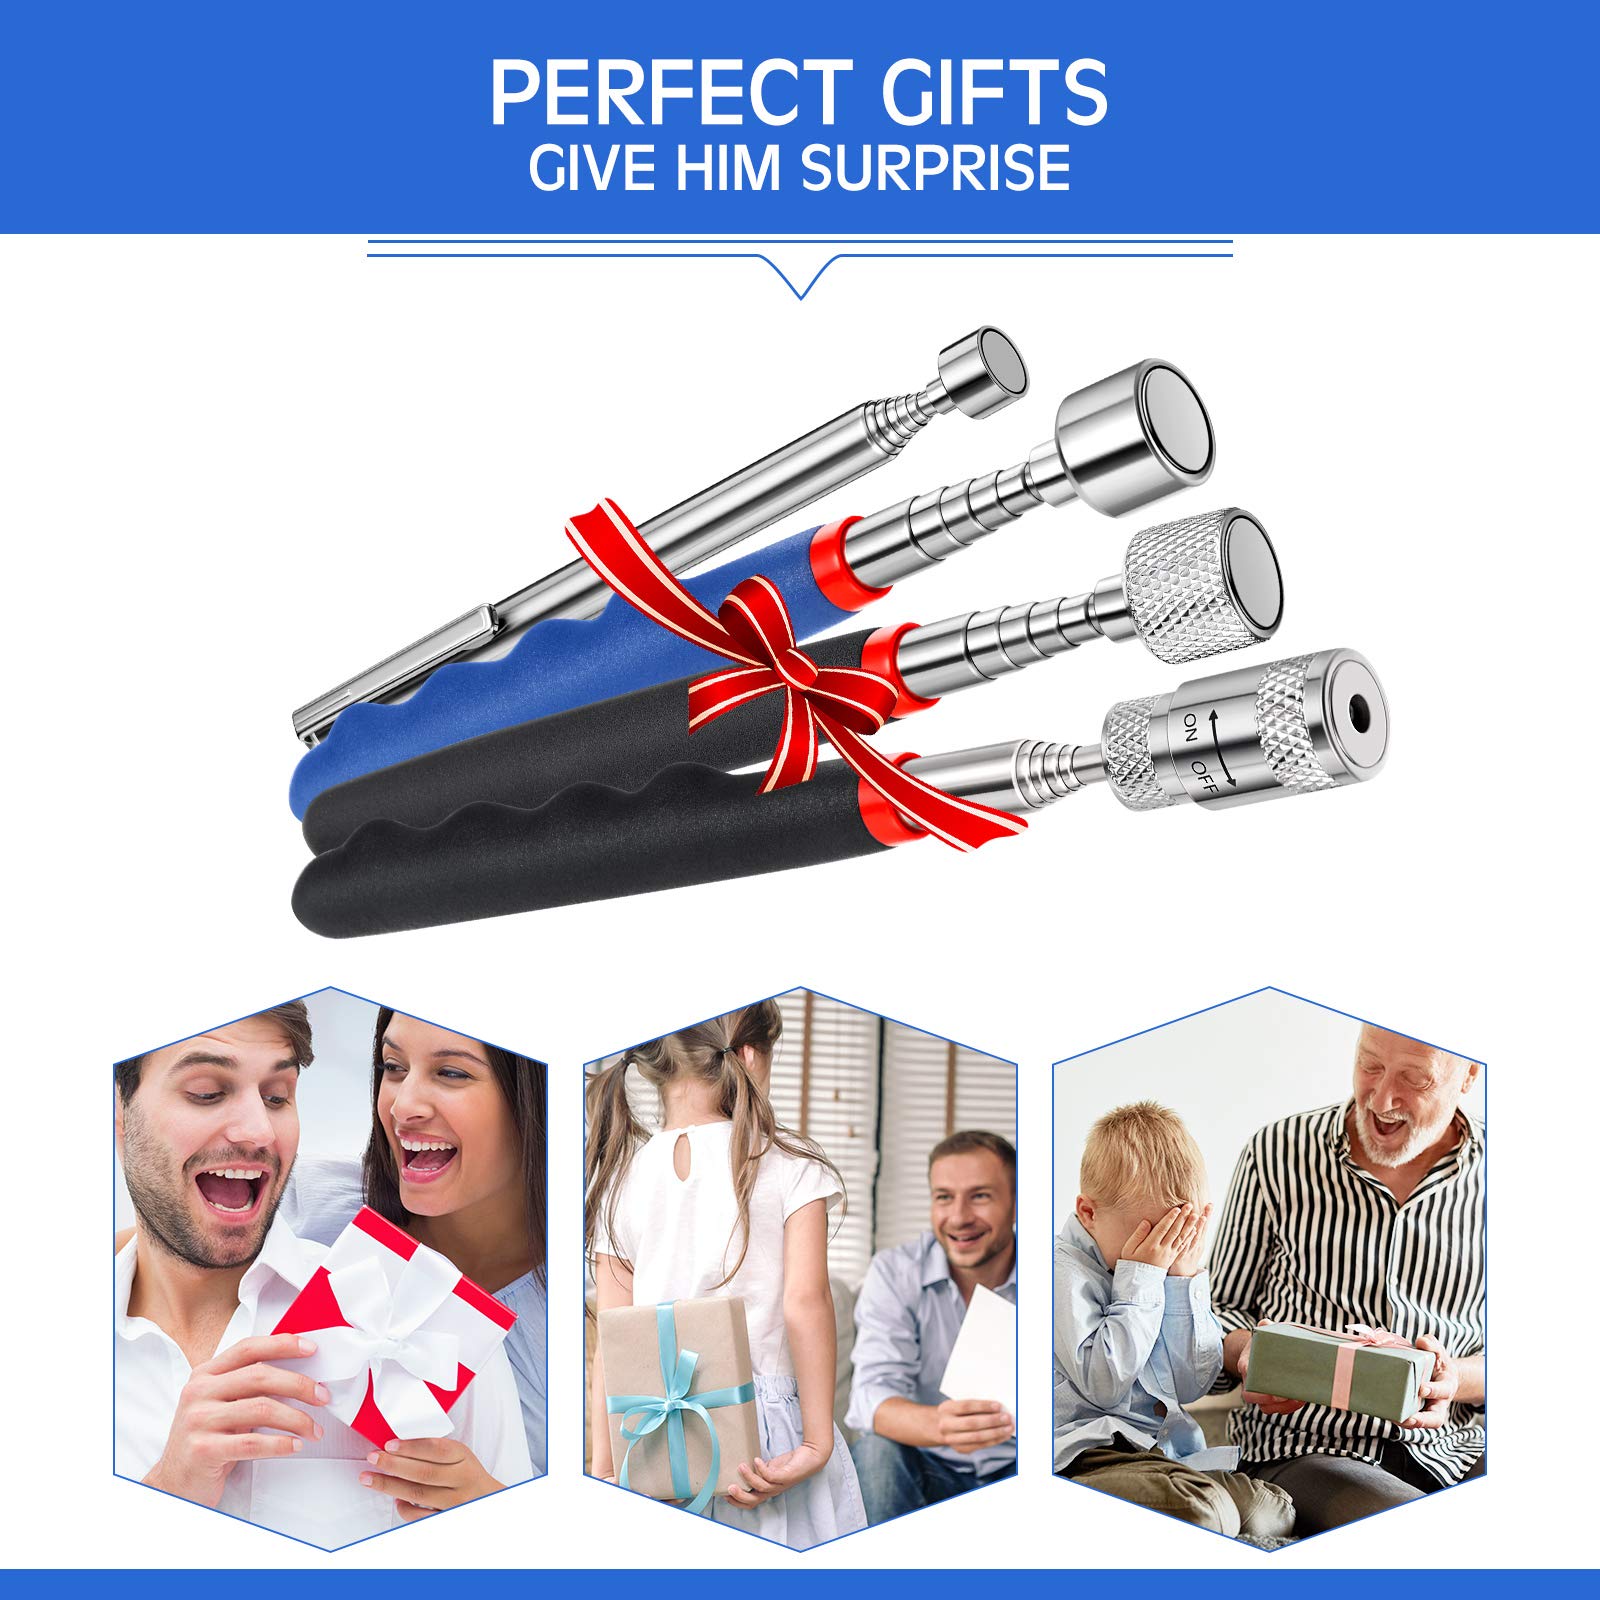 4 Pieces Telescoping Magnet Pickup Tools Includes 8 lb Magnet Pickup Tool Flexible Magnetic Stick Gadget 20 lb 15 lb and 3 lb Magnet Pick-up Tool Set for Men Birthday Father's Day Christmas